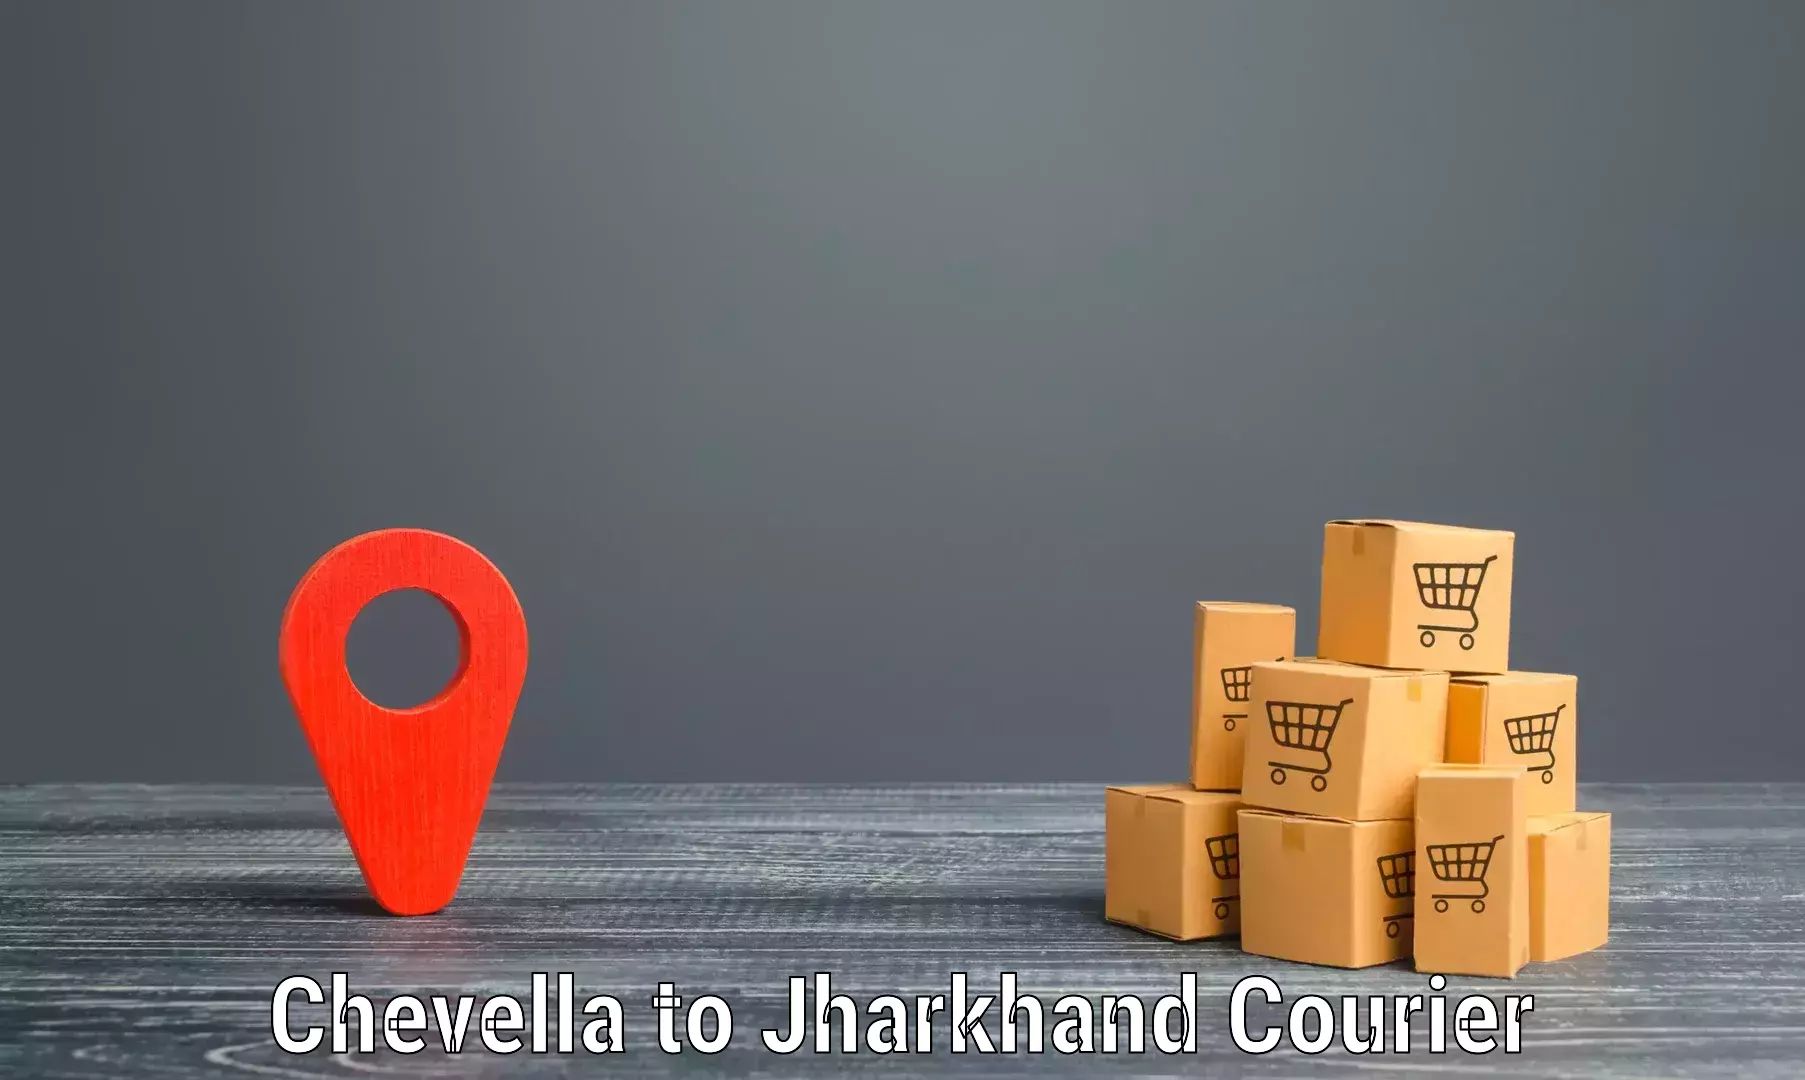 Air courier services Chevella to Godabar Chatra